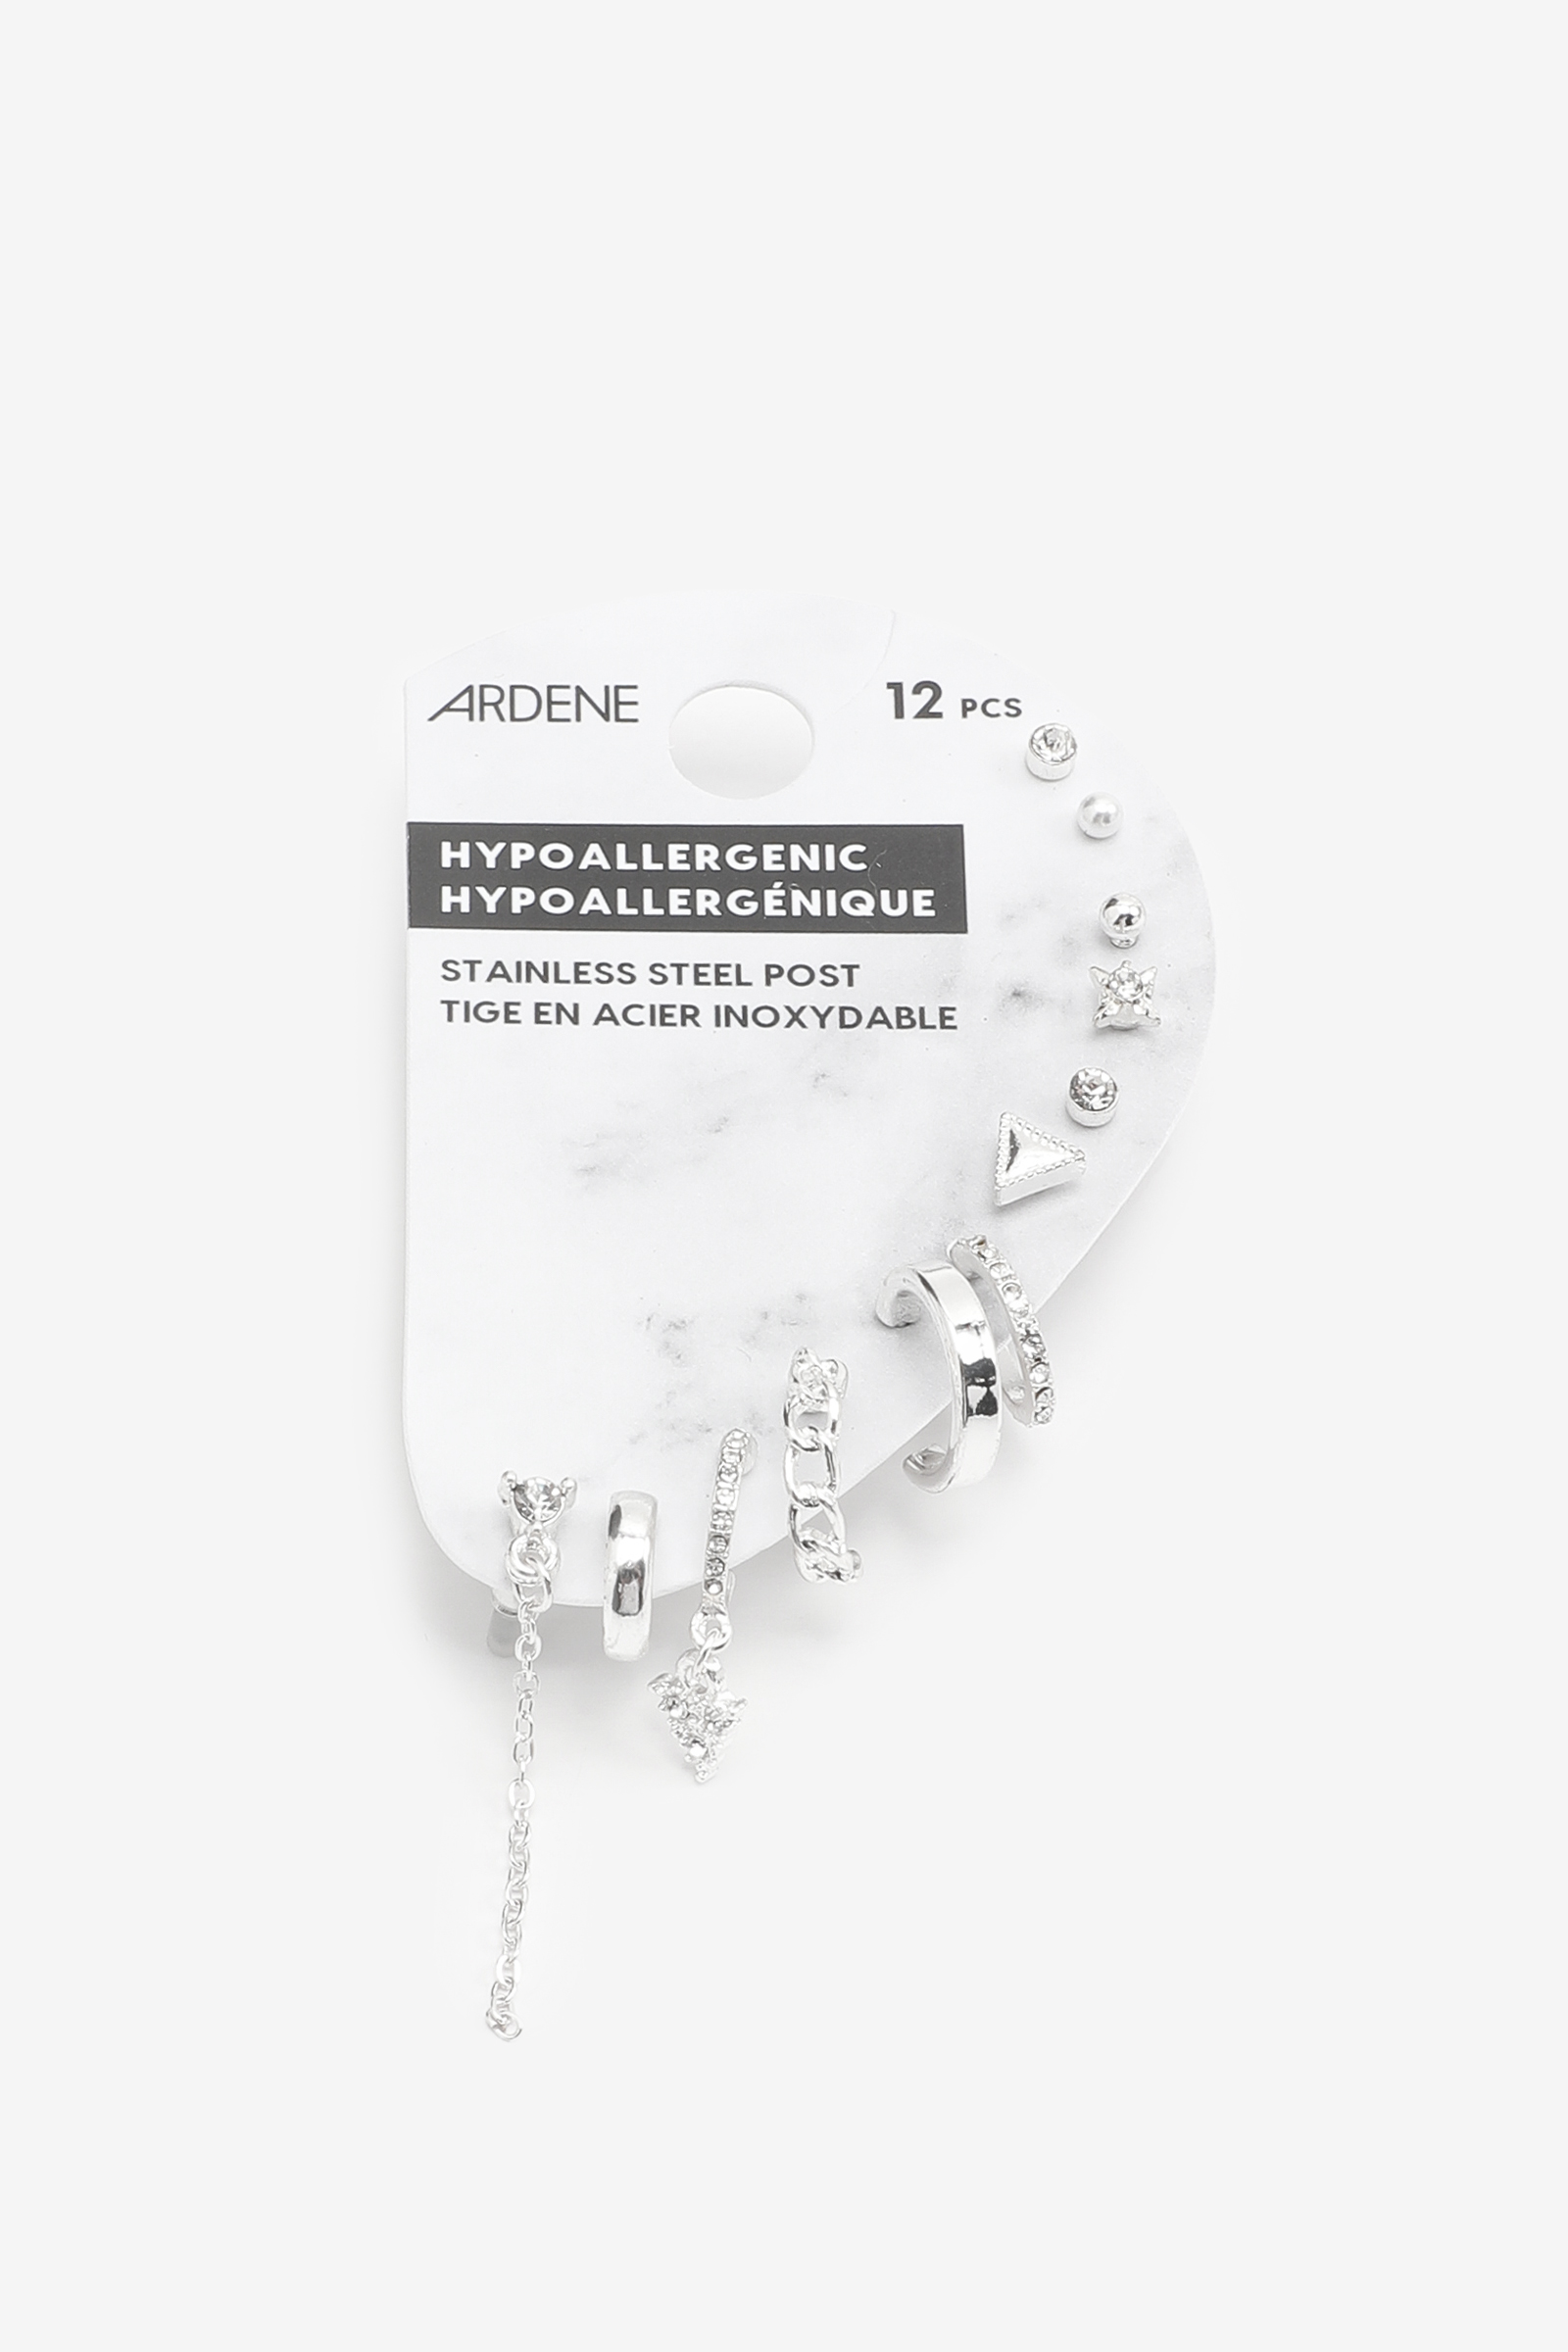 Ardene Pack of Silver-Tone Mix Earrings | Stainless Steel